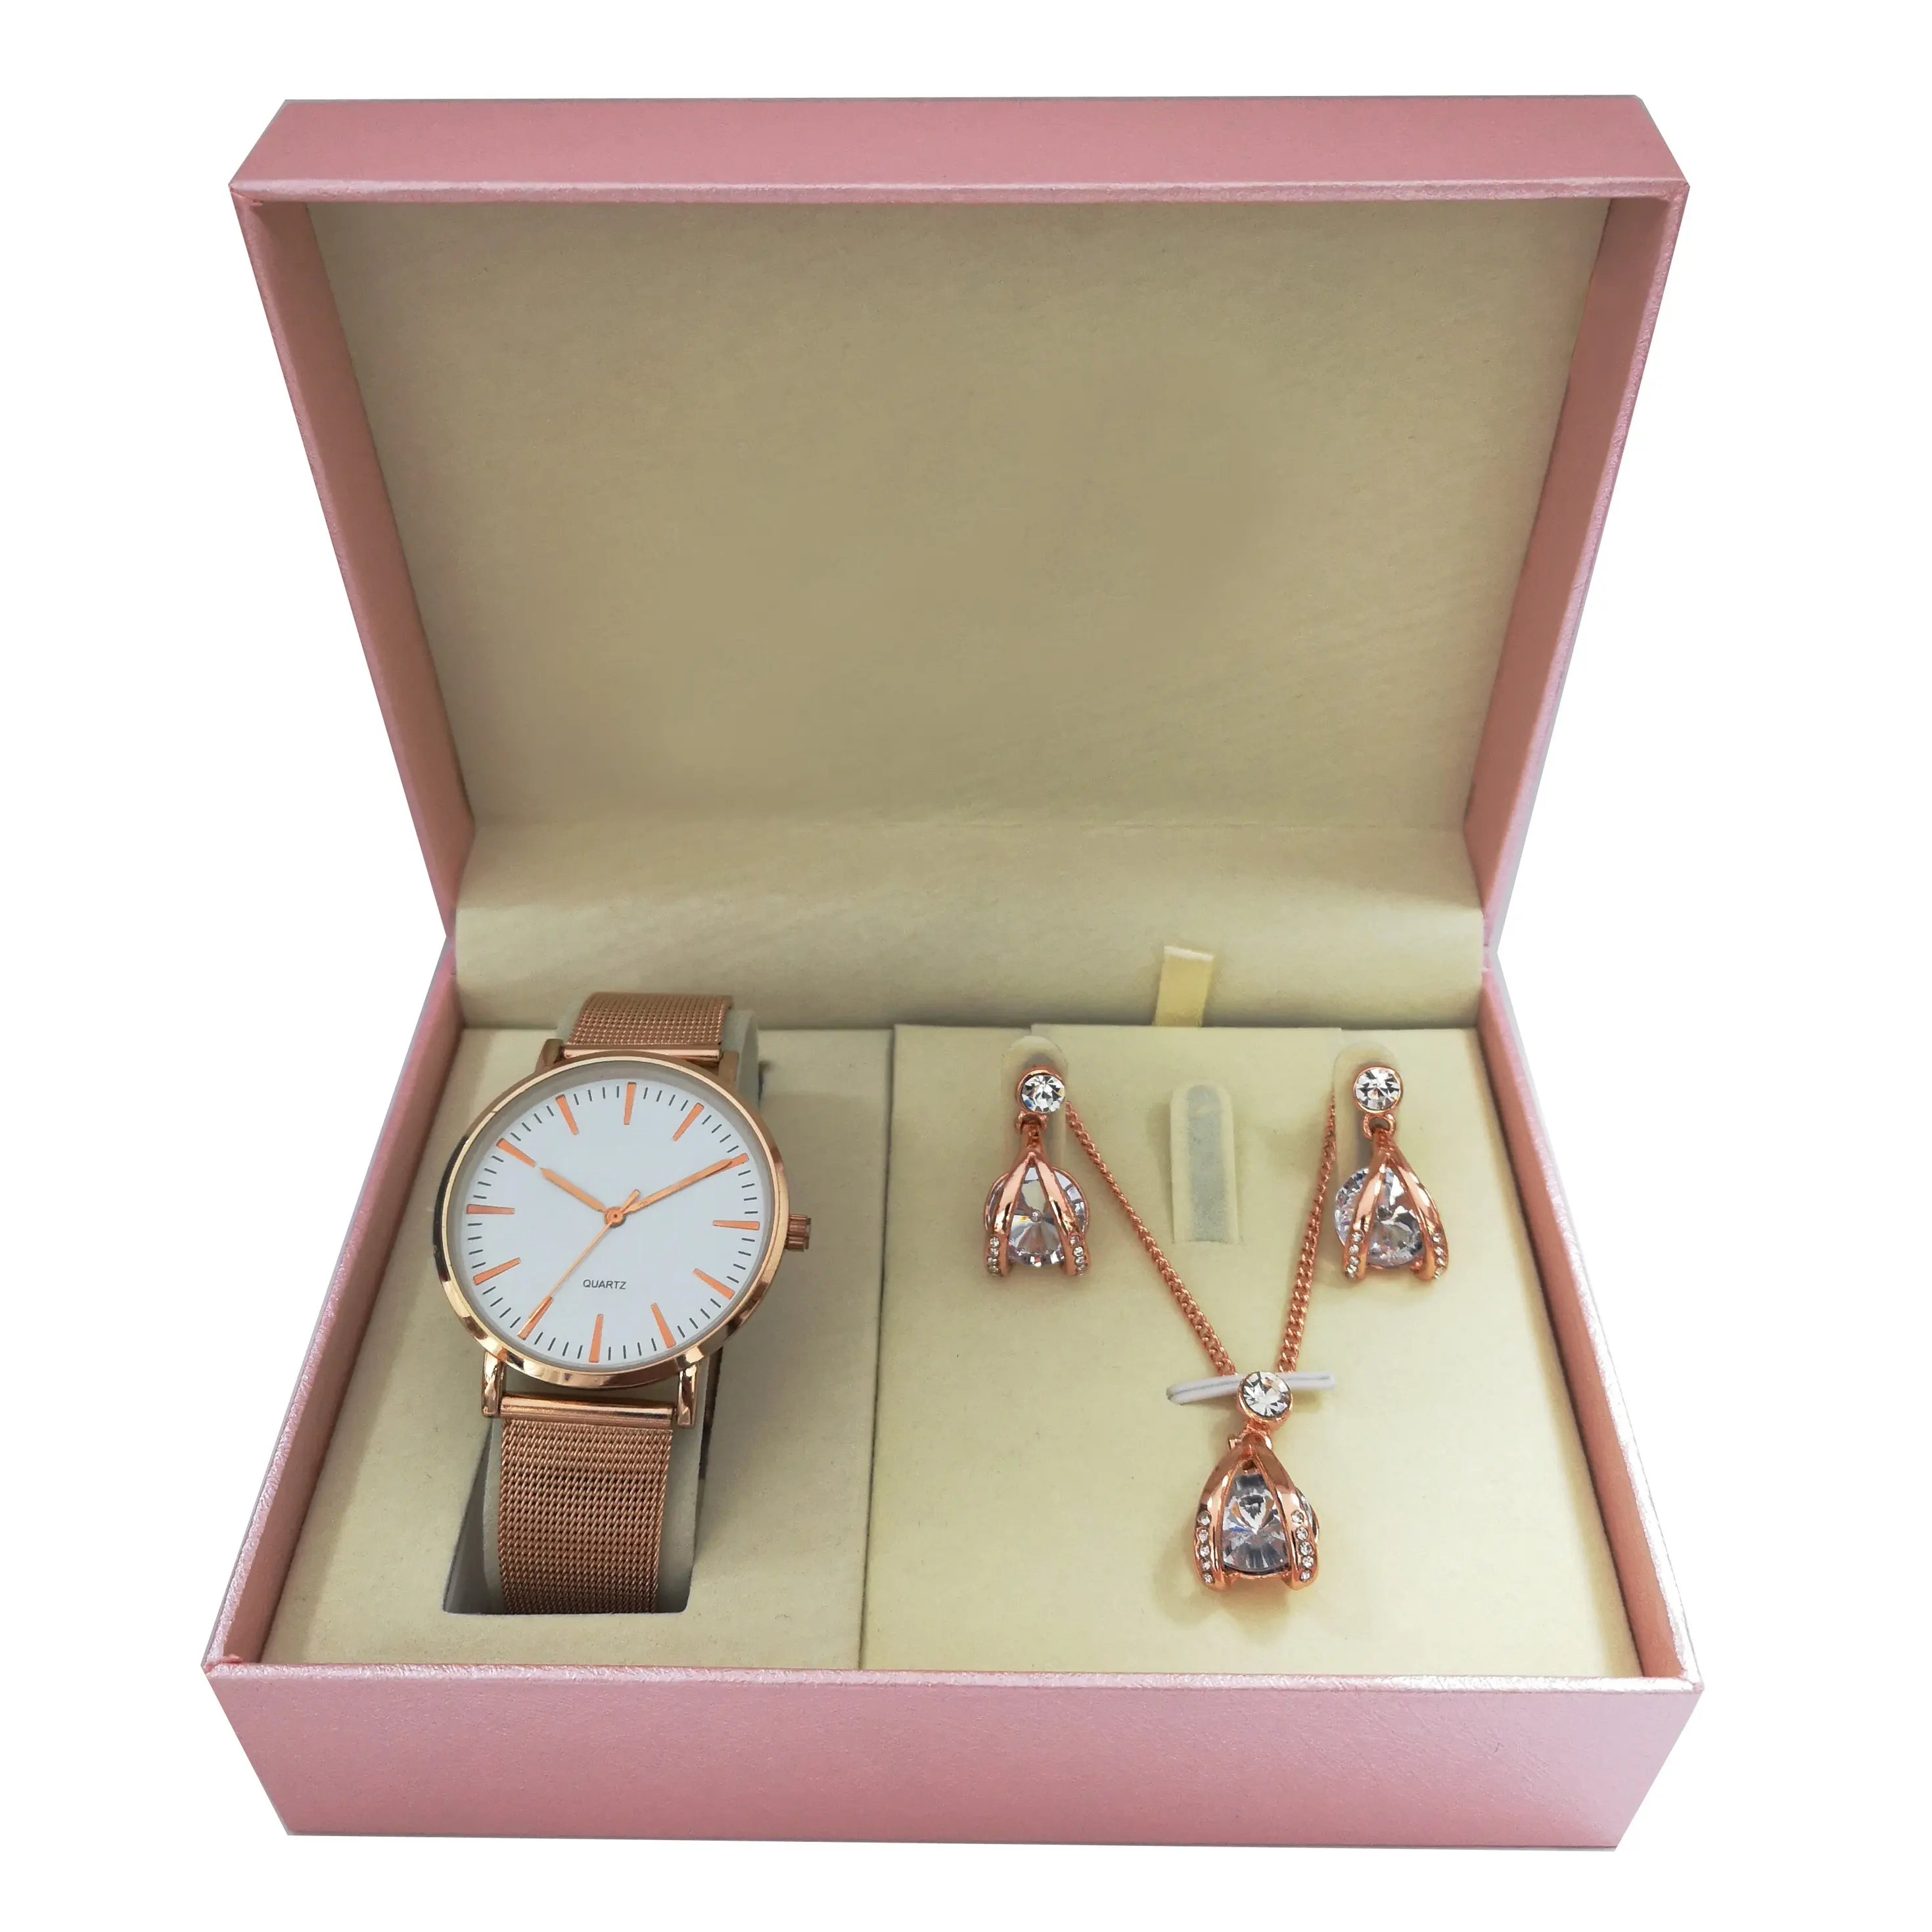 China factory hot sale promotion rose gold lady watch and jewelry set/ women silver watch and earrings and necklace gift set